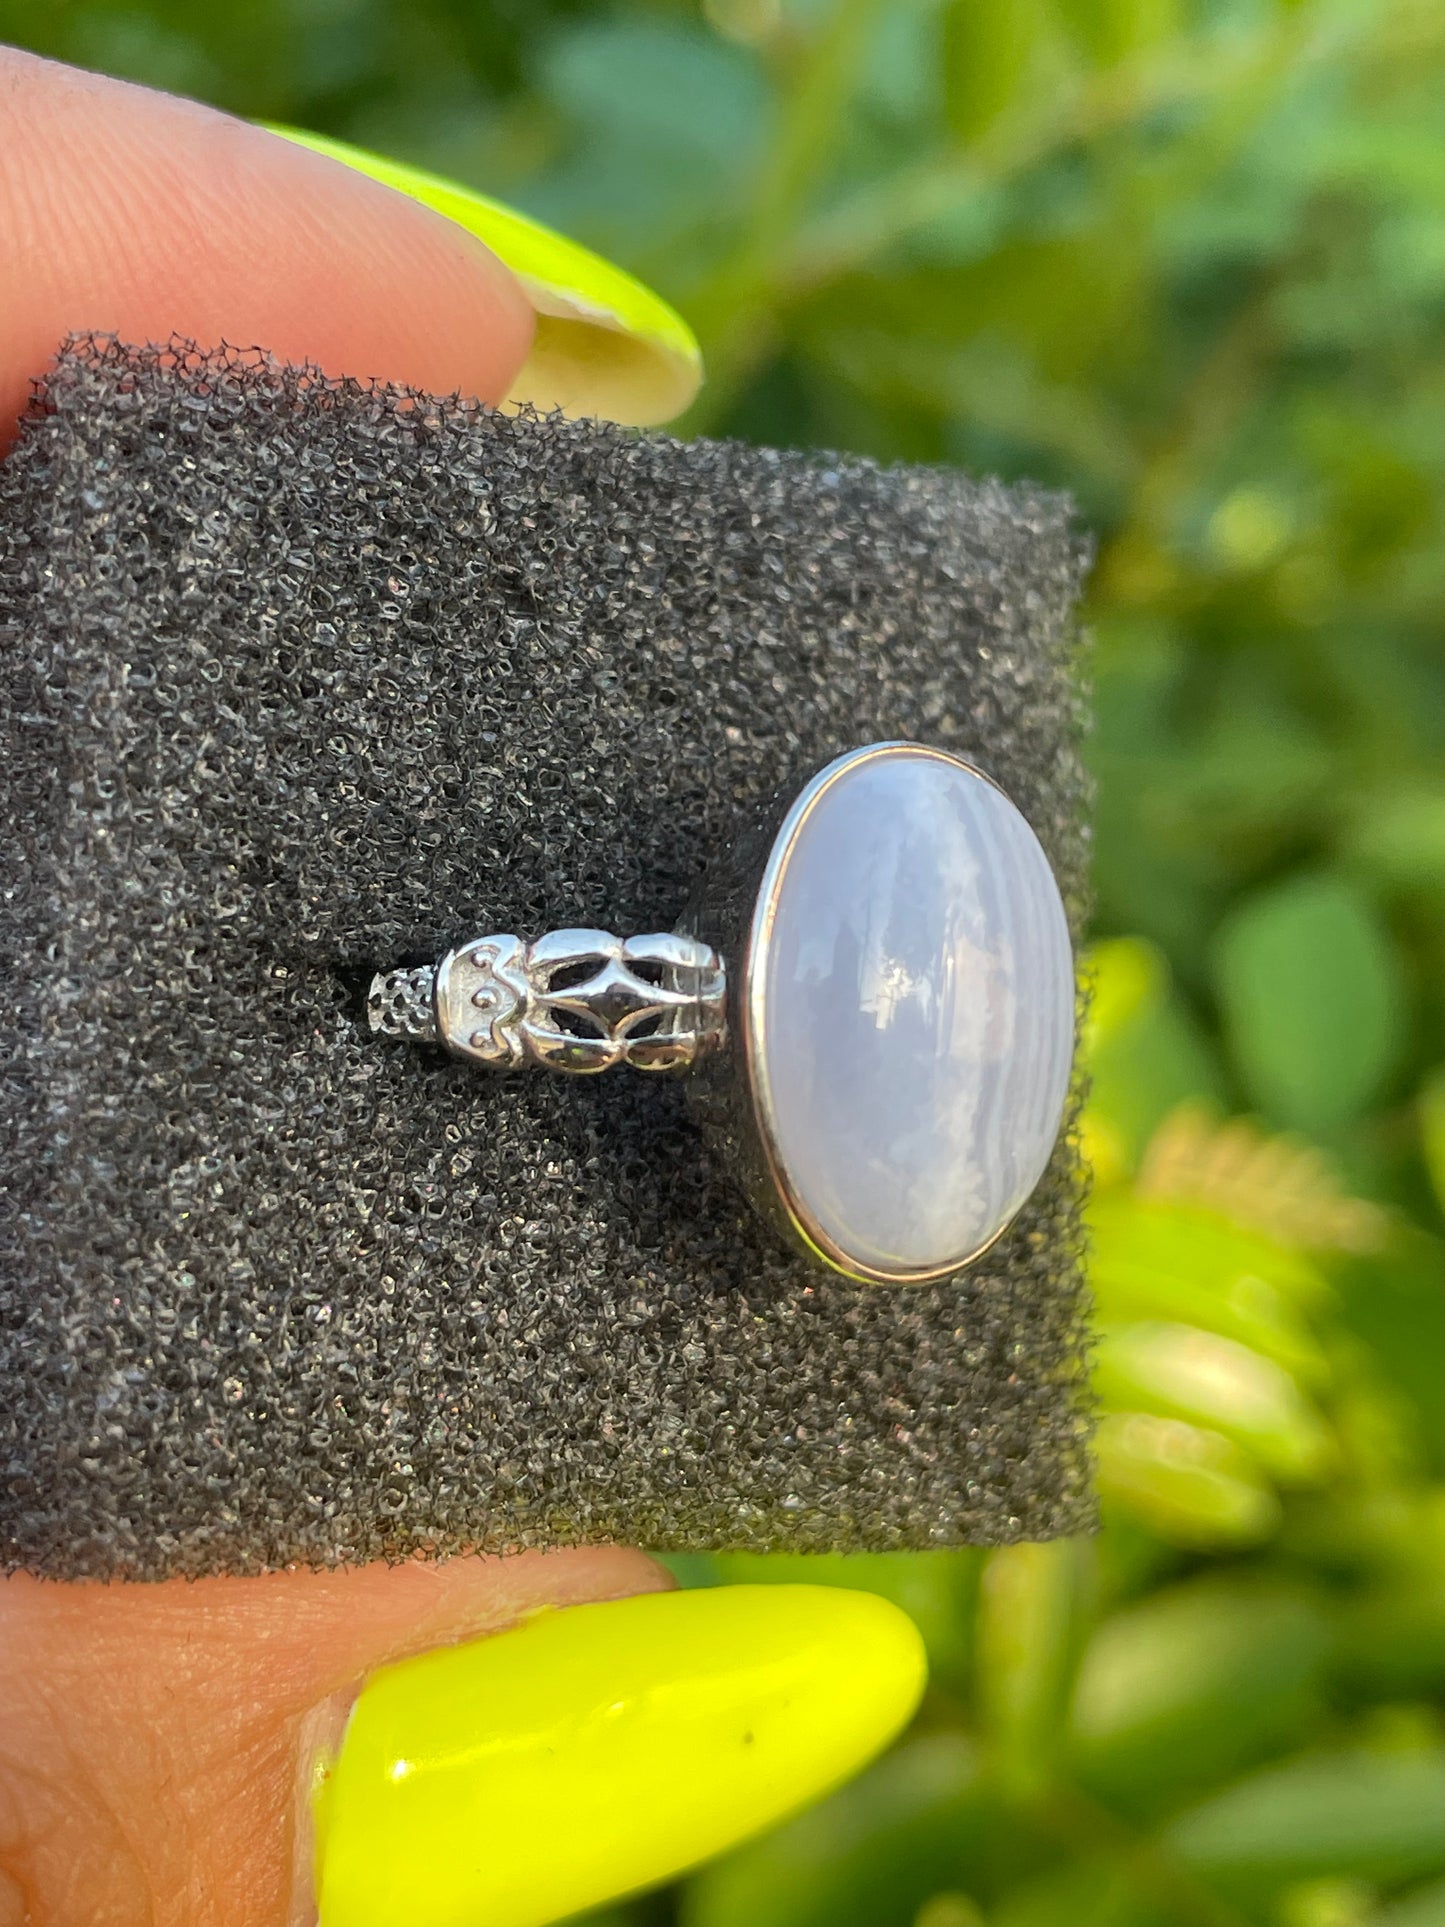 Blue Lace Agate .925 Sterling Silver Ring